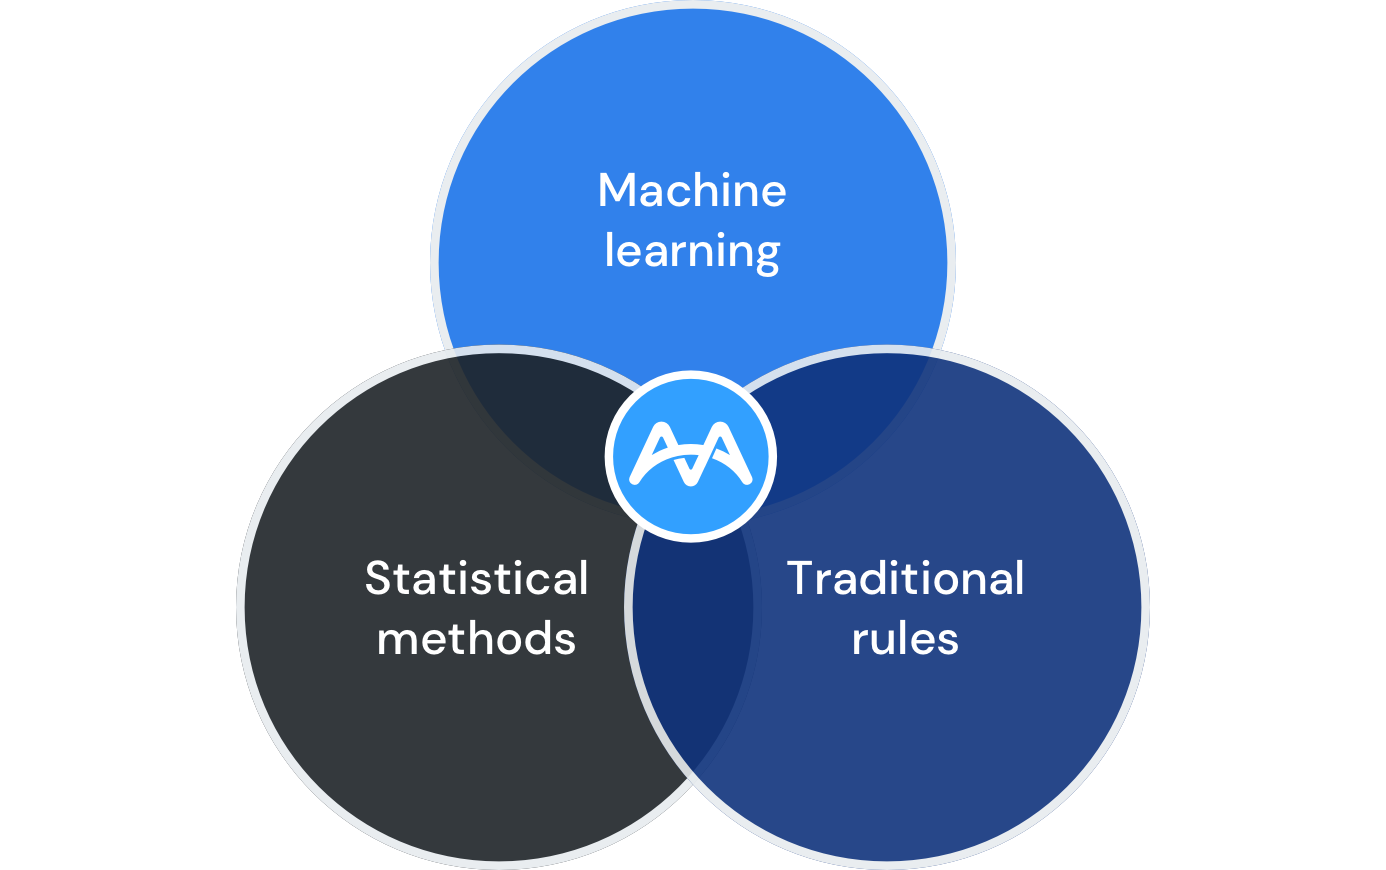 Ensemble AI includes Machine learning, statistical methods and traditional rules.